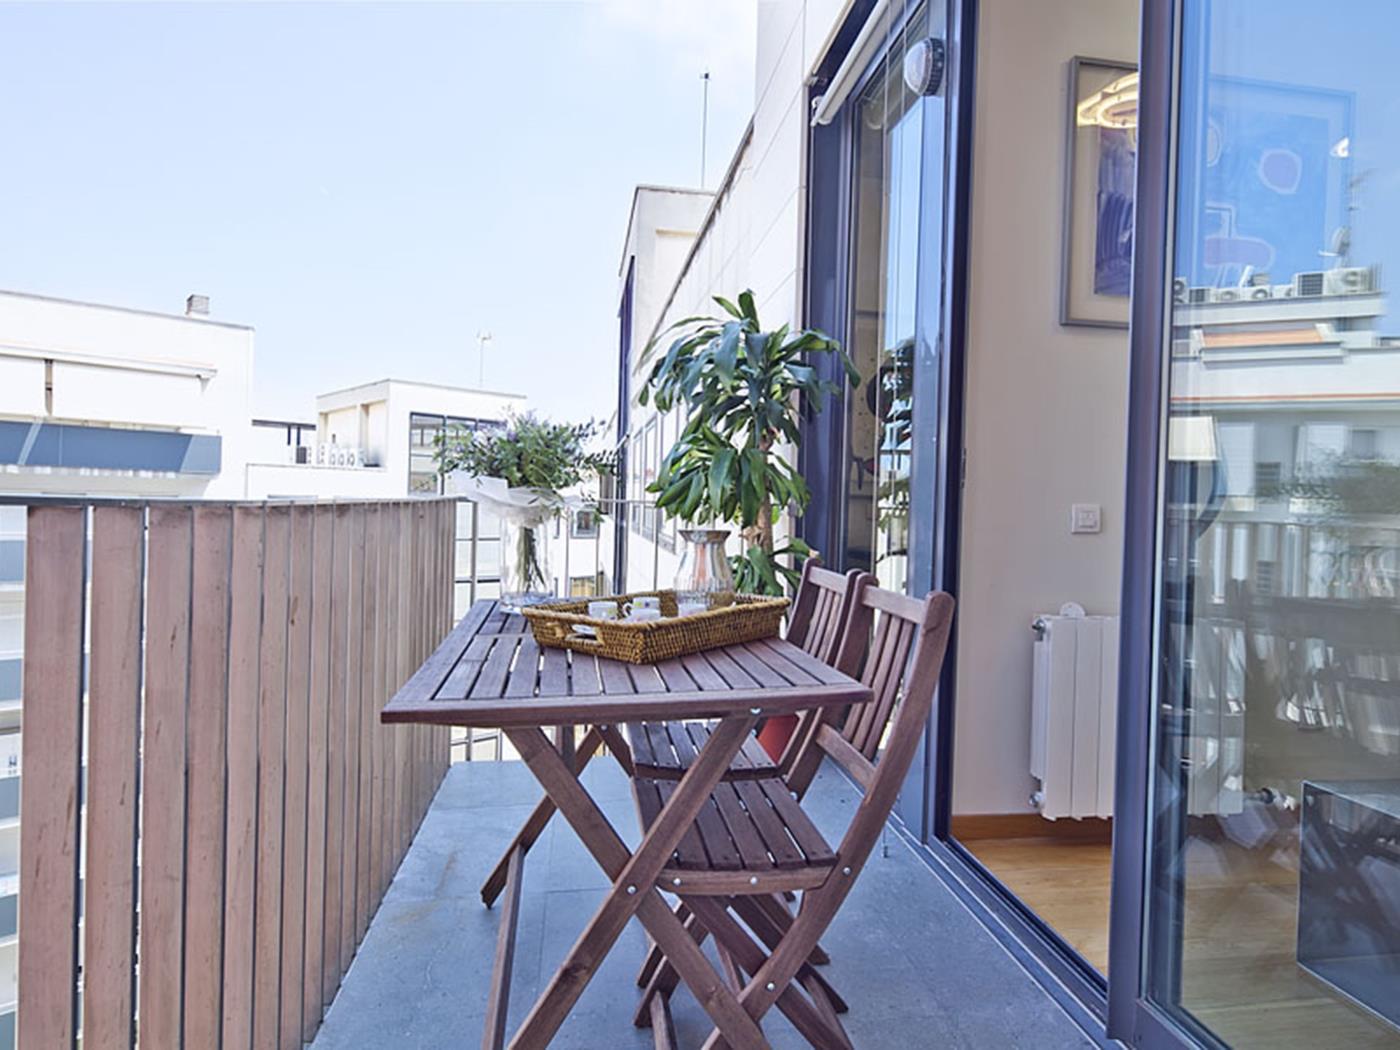 6 apartments with terrace & pool for up to 48 pax - My Space Barcelona Apartments